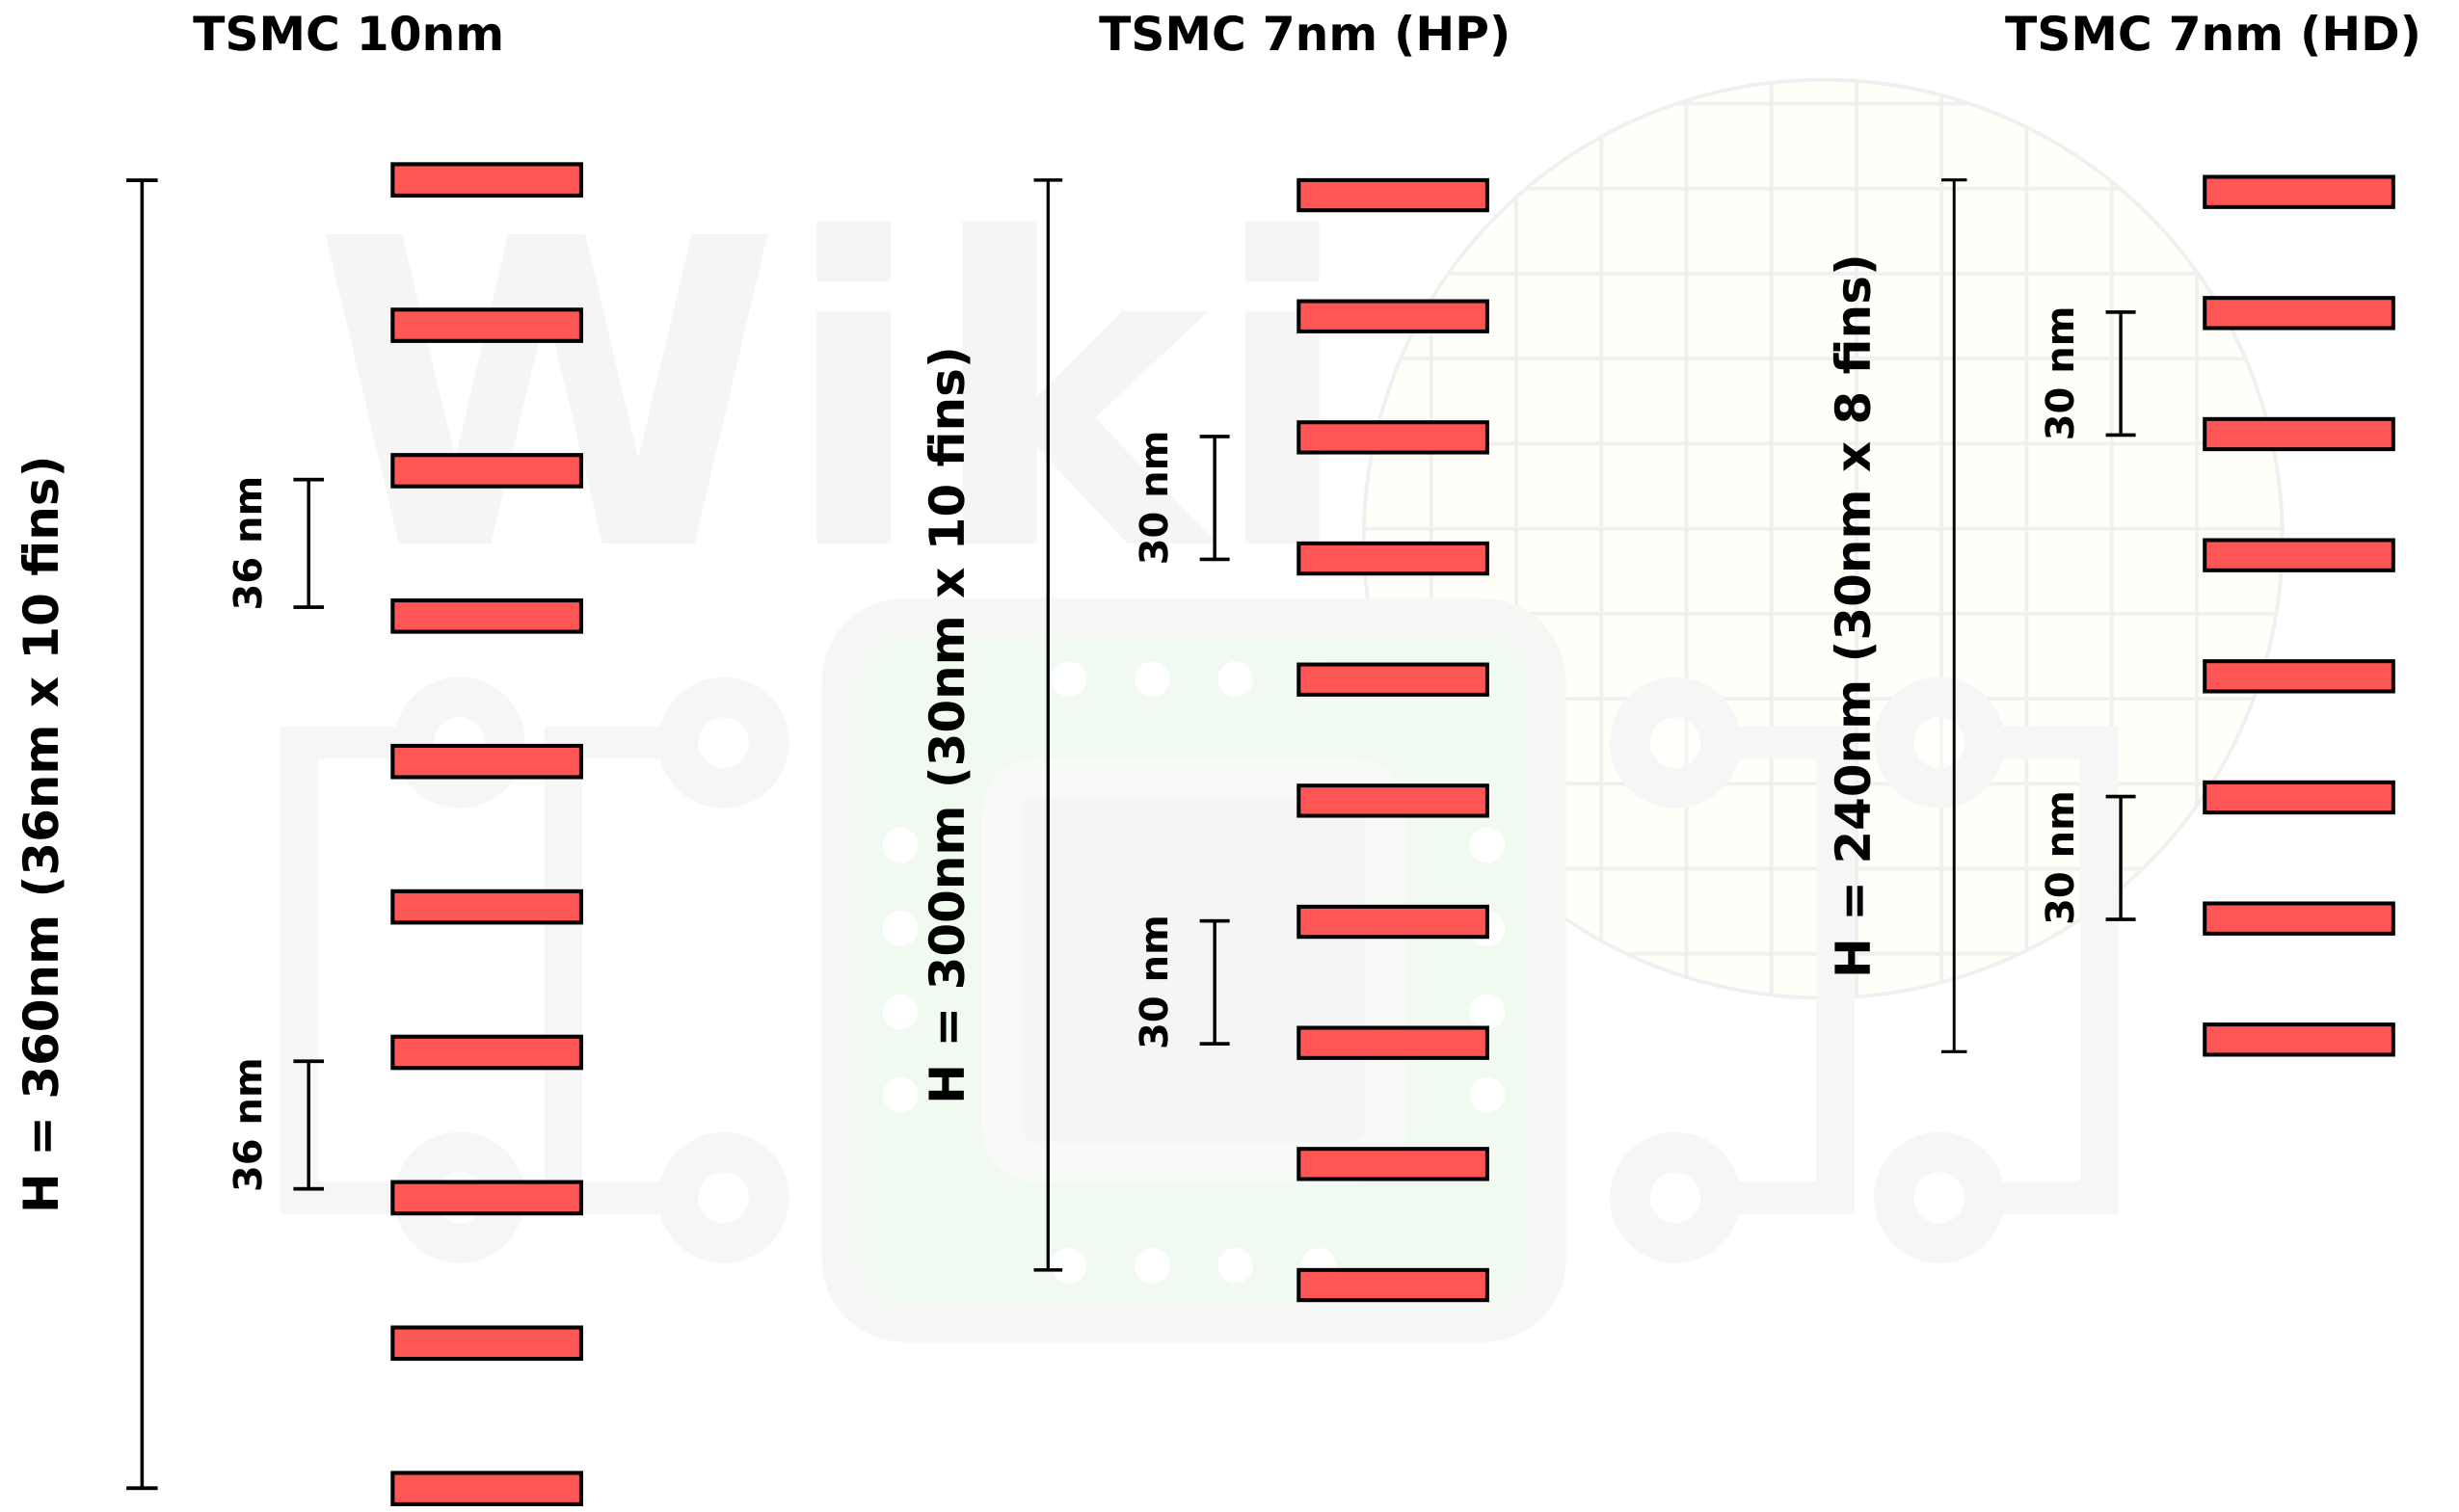 tsmc-10-7nm-cell-height.png